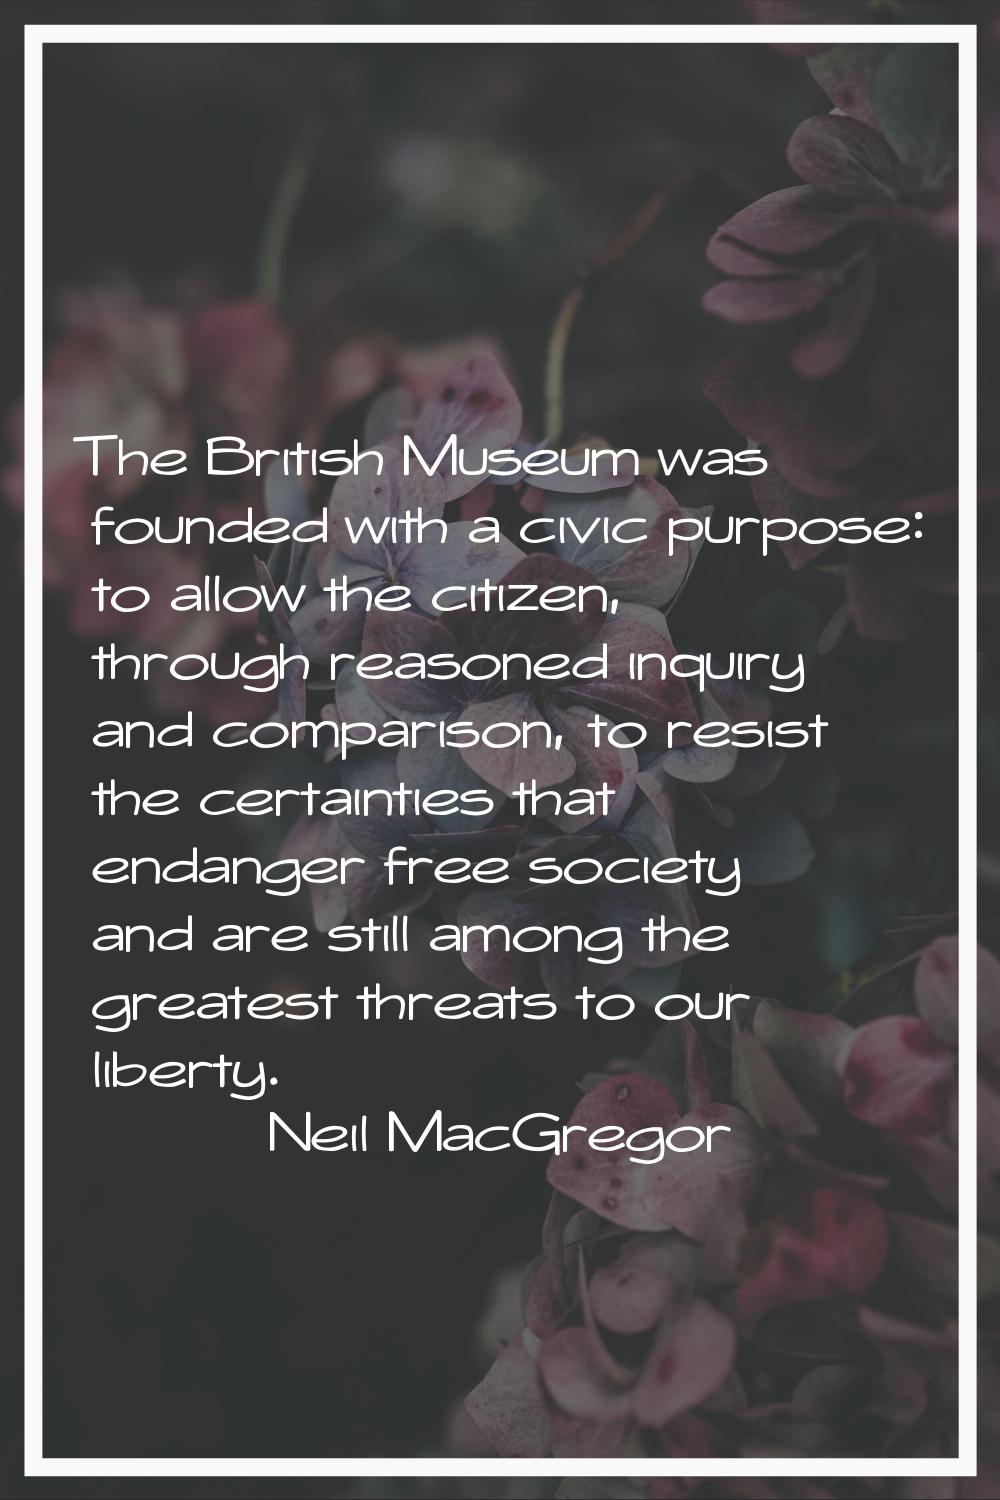 The British Museum was founded with a civic purpose: to allow the citizen, through reasoned inquiry